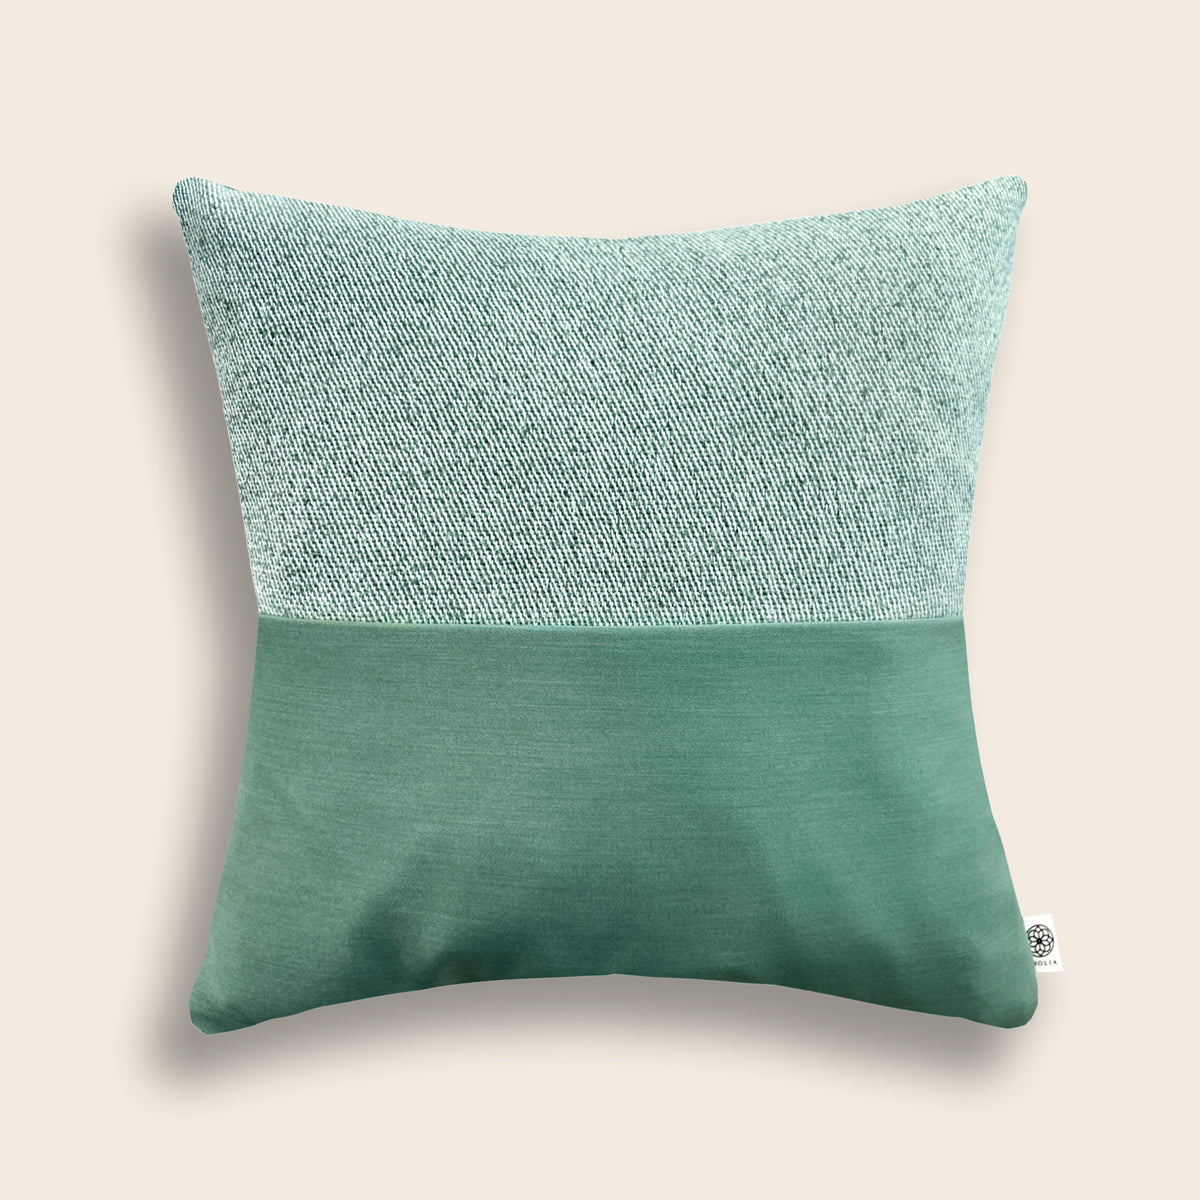 Upcycled cushion cover, 40x40cm, green